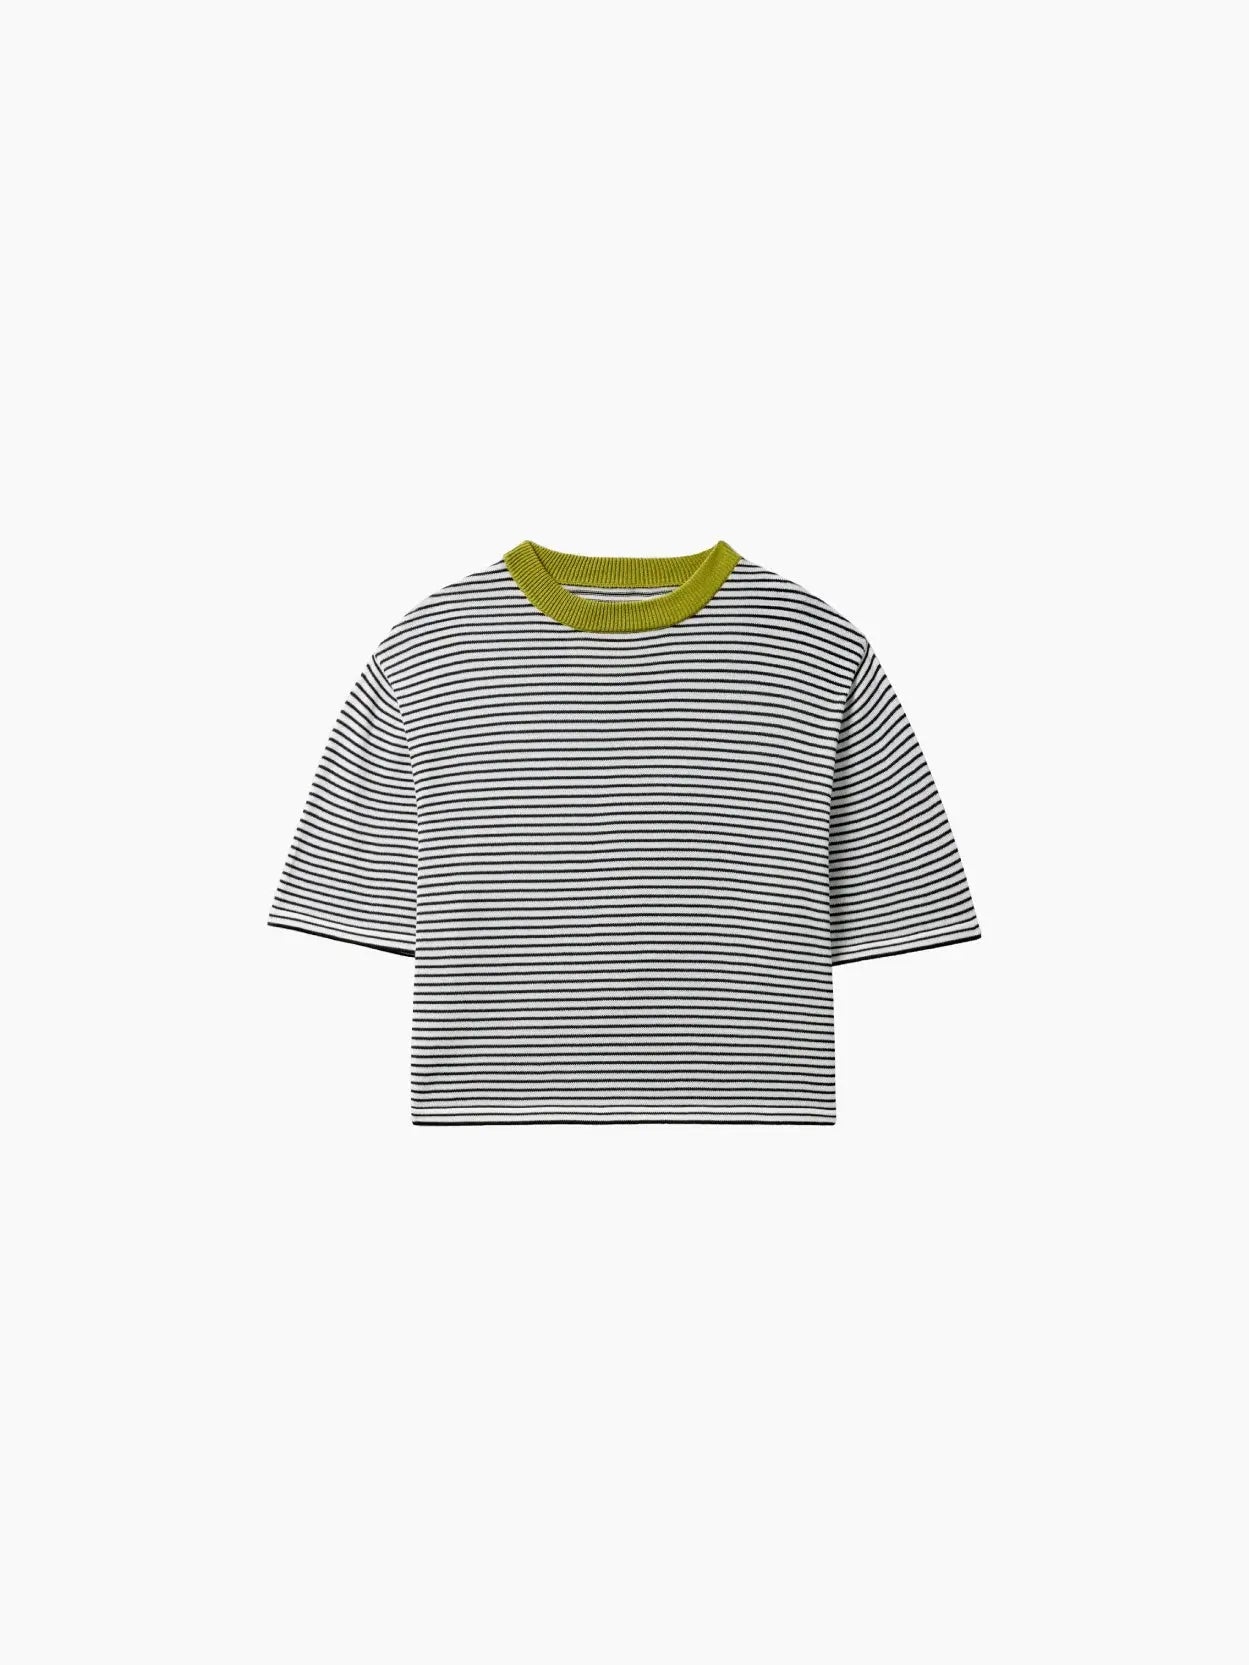 A Cotton Striped T-Shirt Lime with horizontal black and white stripes and a loose fit is shown. The neckline is round and features a contrasting olive-green color. This stylish piece by Cordera, available at Bassalstore in Barcelona, stands out against the plain white background.